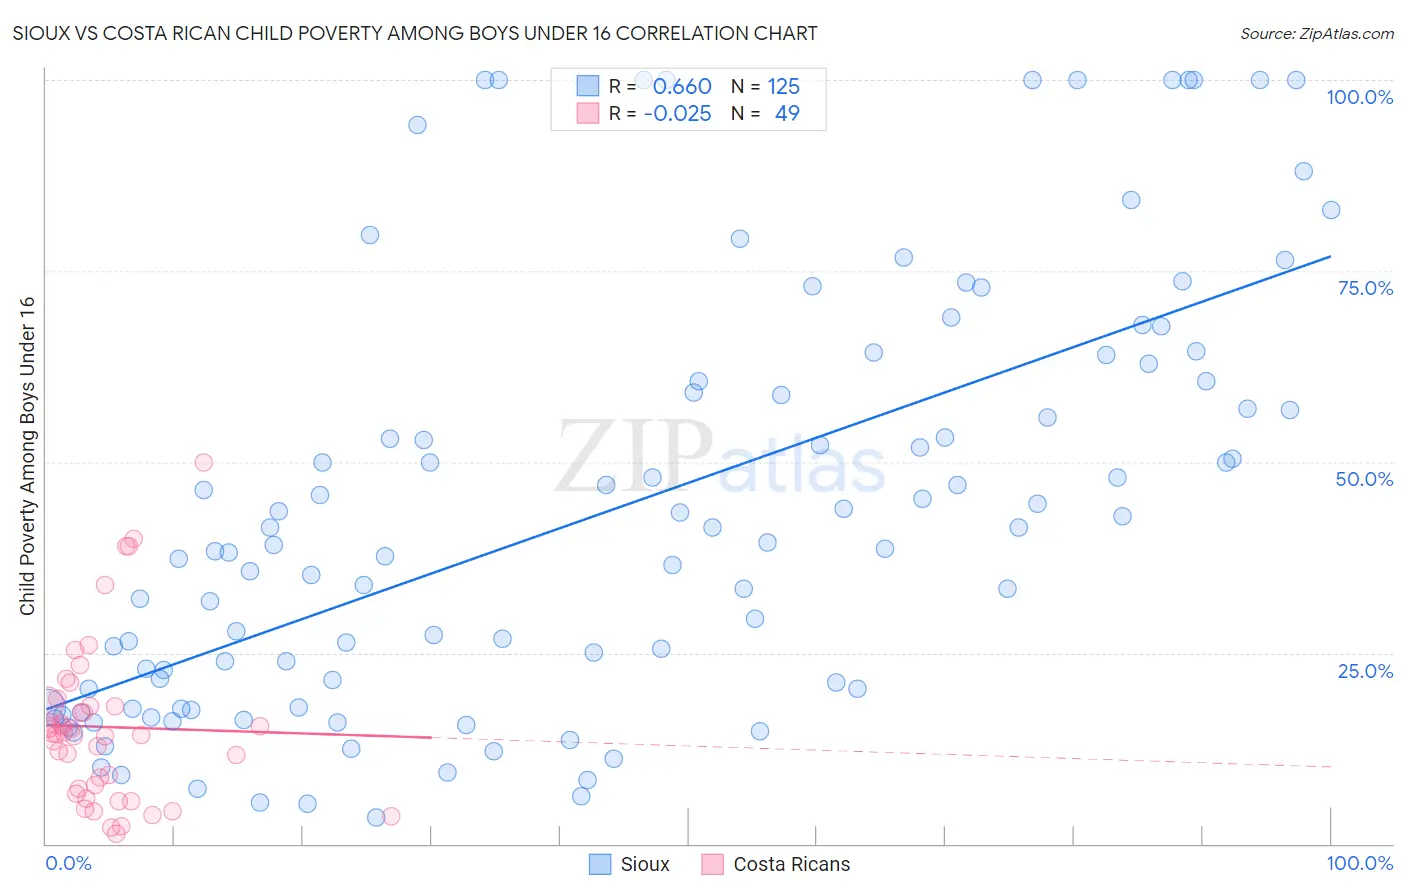 Sioux vs Costa Rican Child Poverty Among Boys Under 16